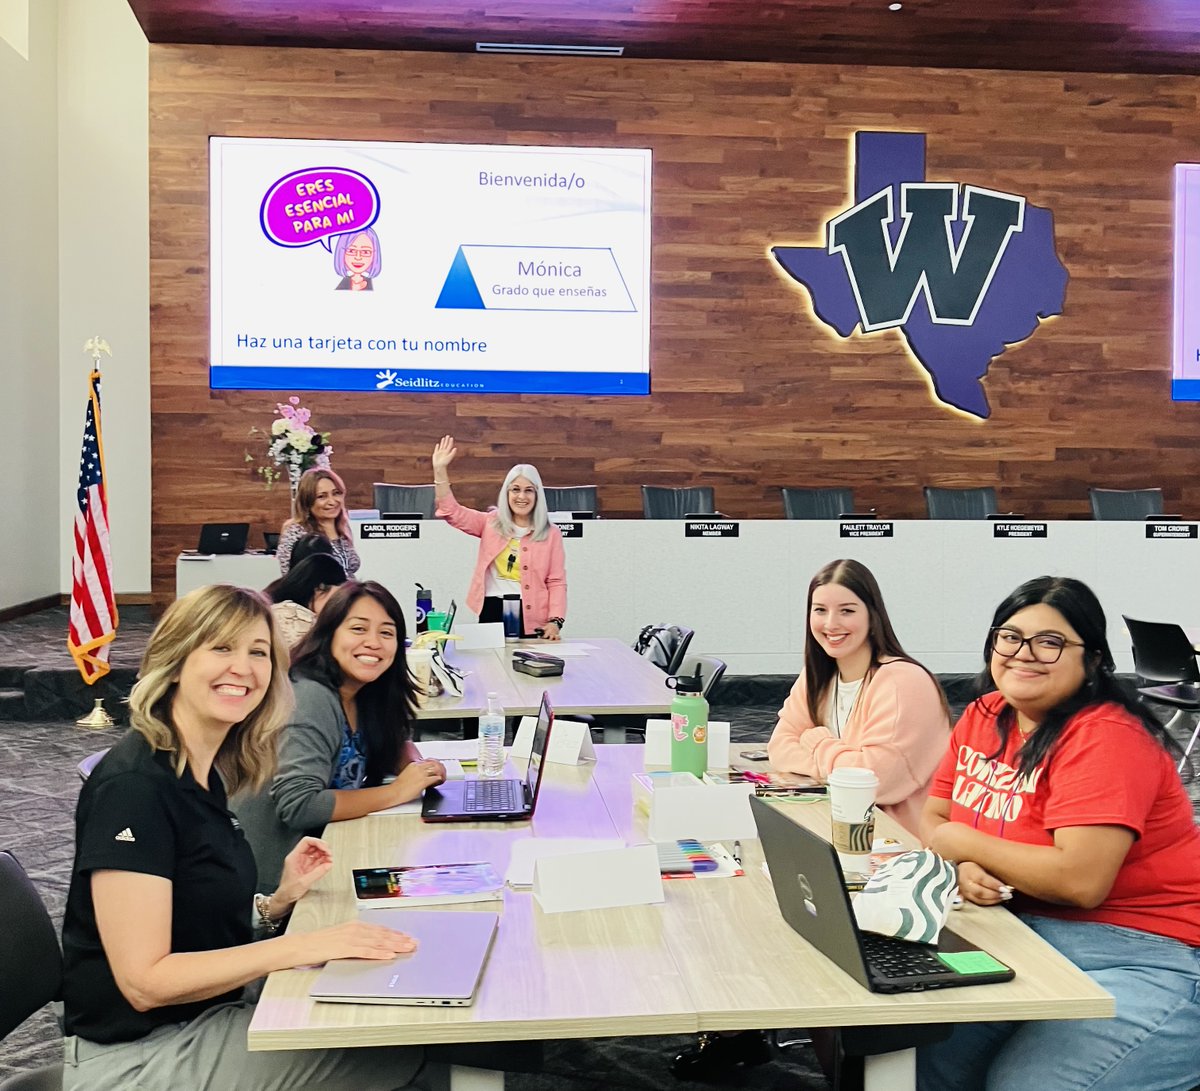 Got to see my colleagues  in @WillisSchools! @Seidlitz_Ed Heard great things about this session from today's participants! Value your gift of #bilingualism! 
@DRMLARA @elisewhitediaz 
#tomalapalabra